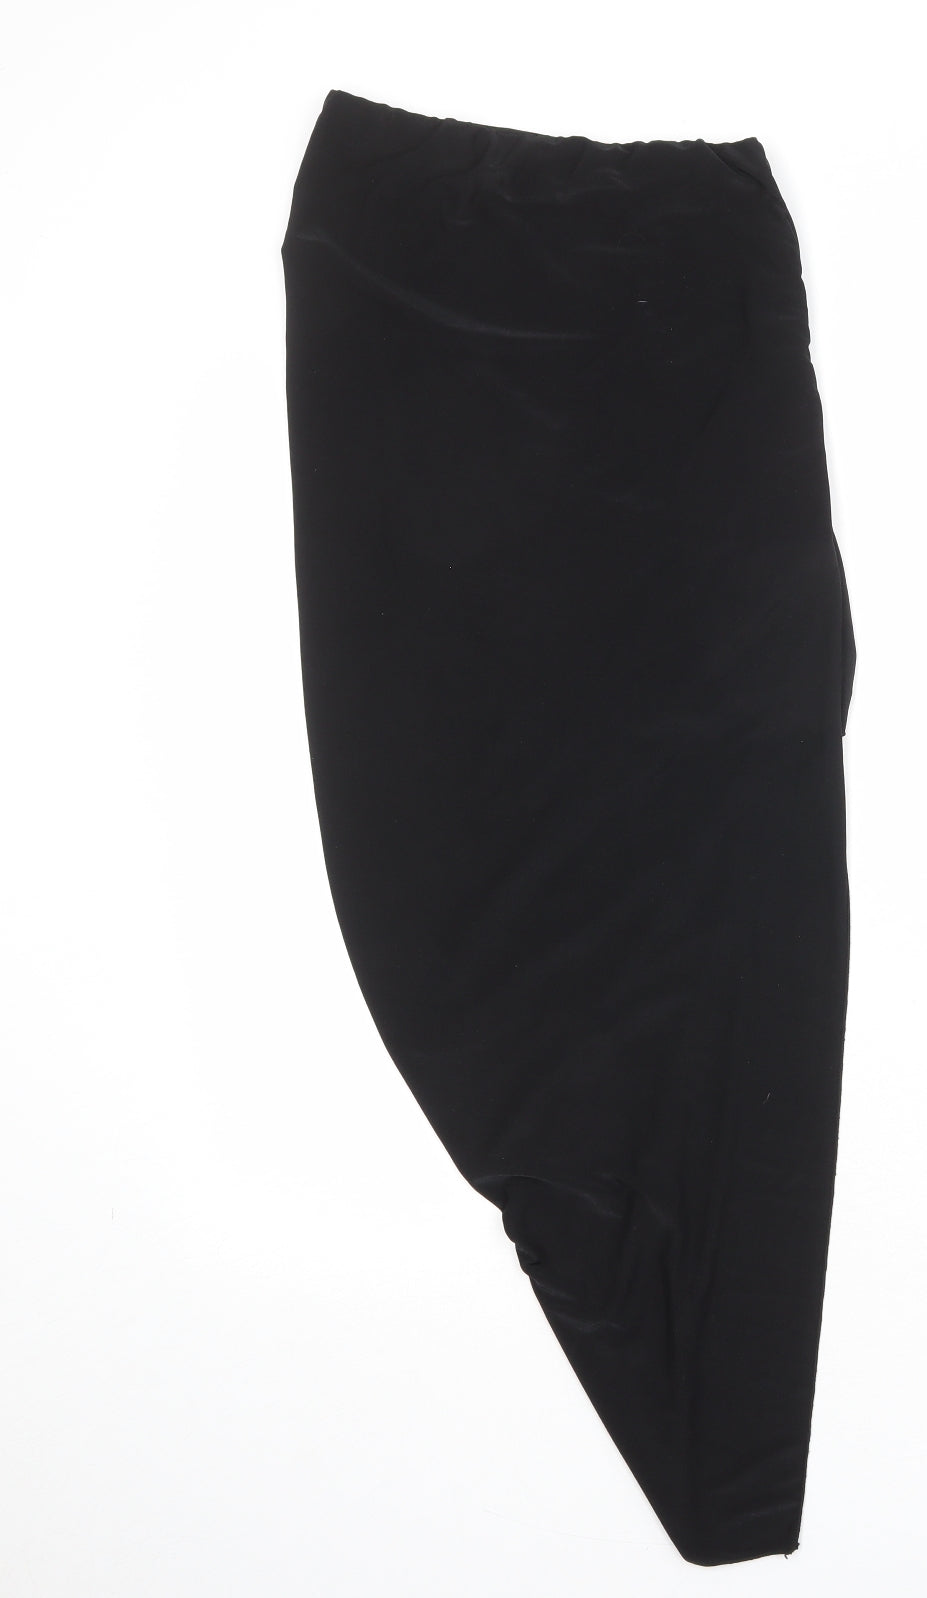 New Look Womens Black Polyester Bandage Skirt Size 10